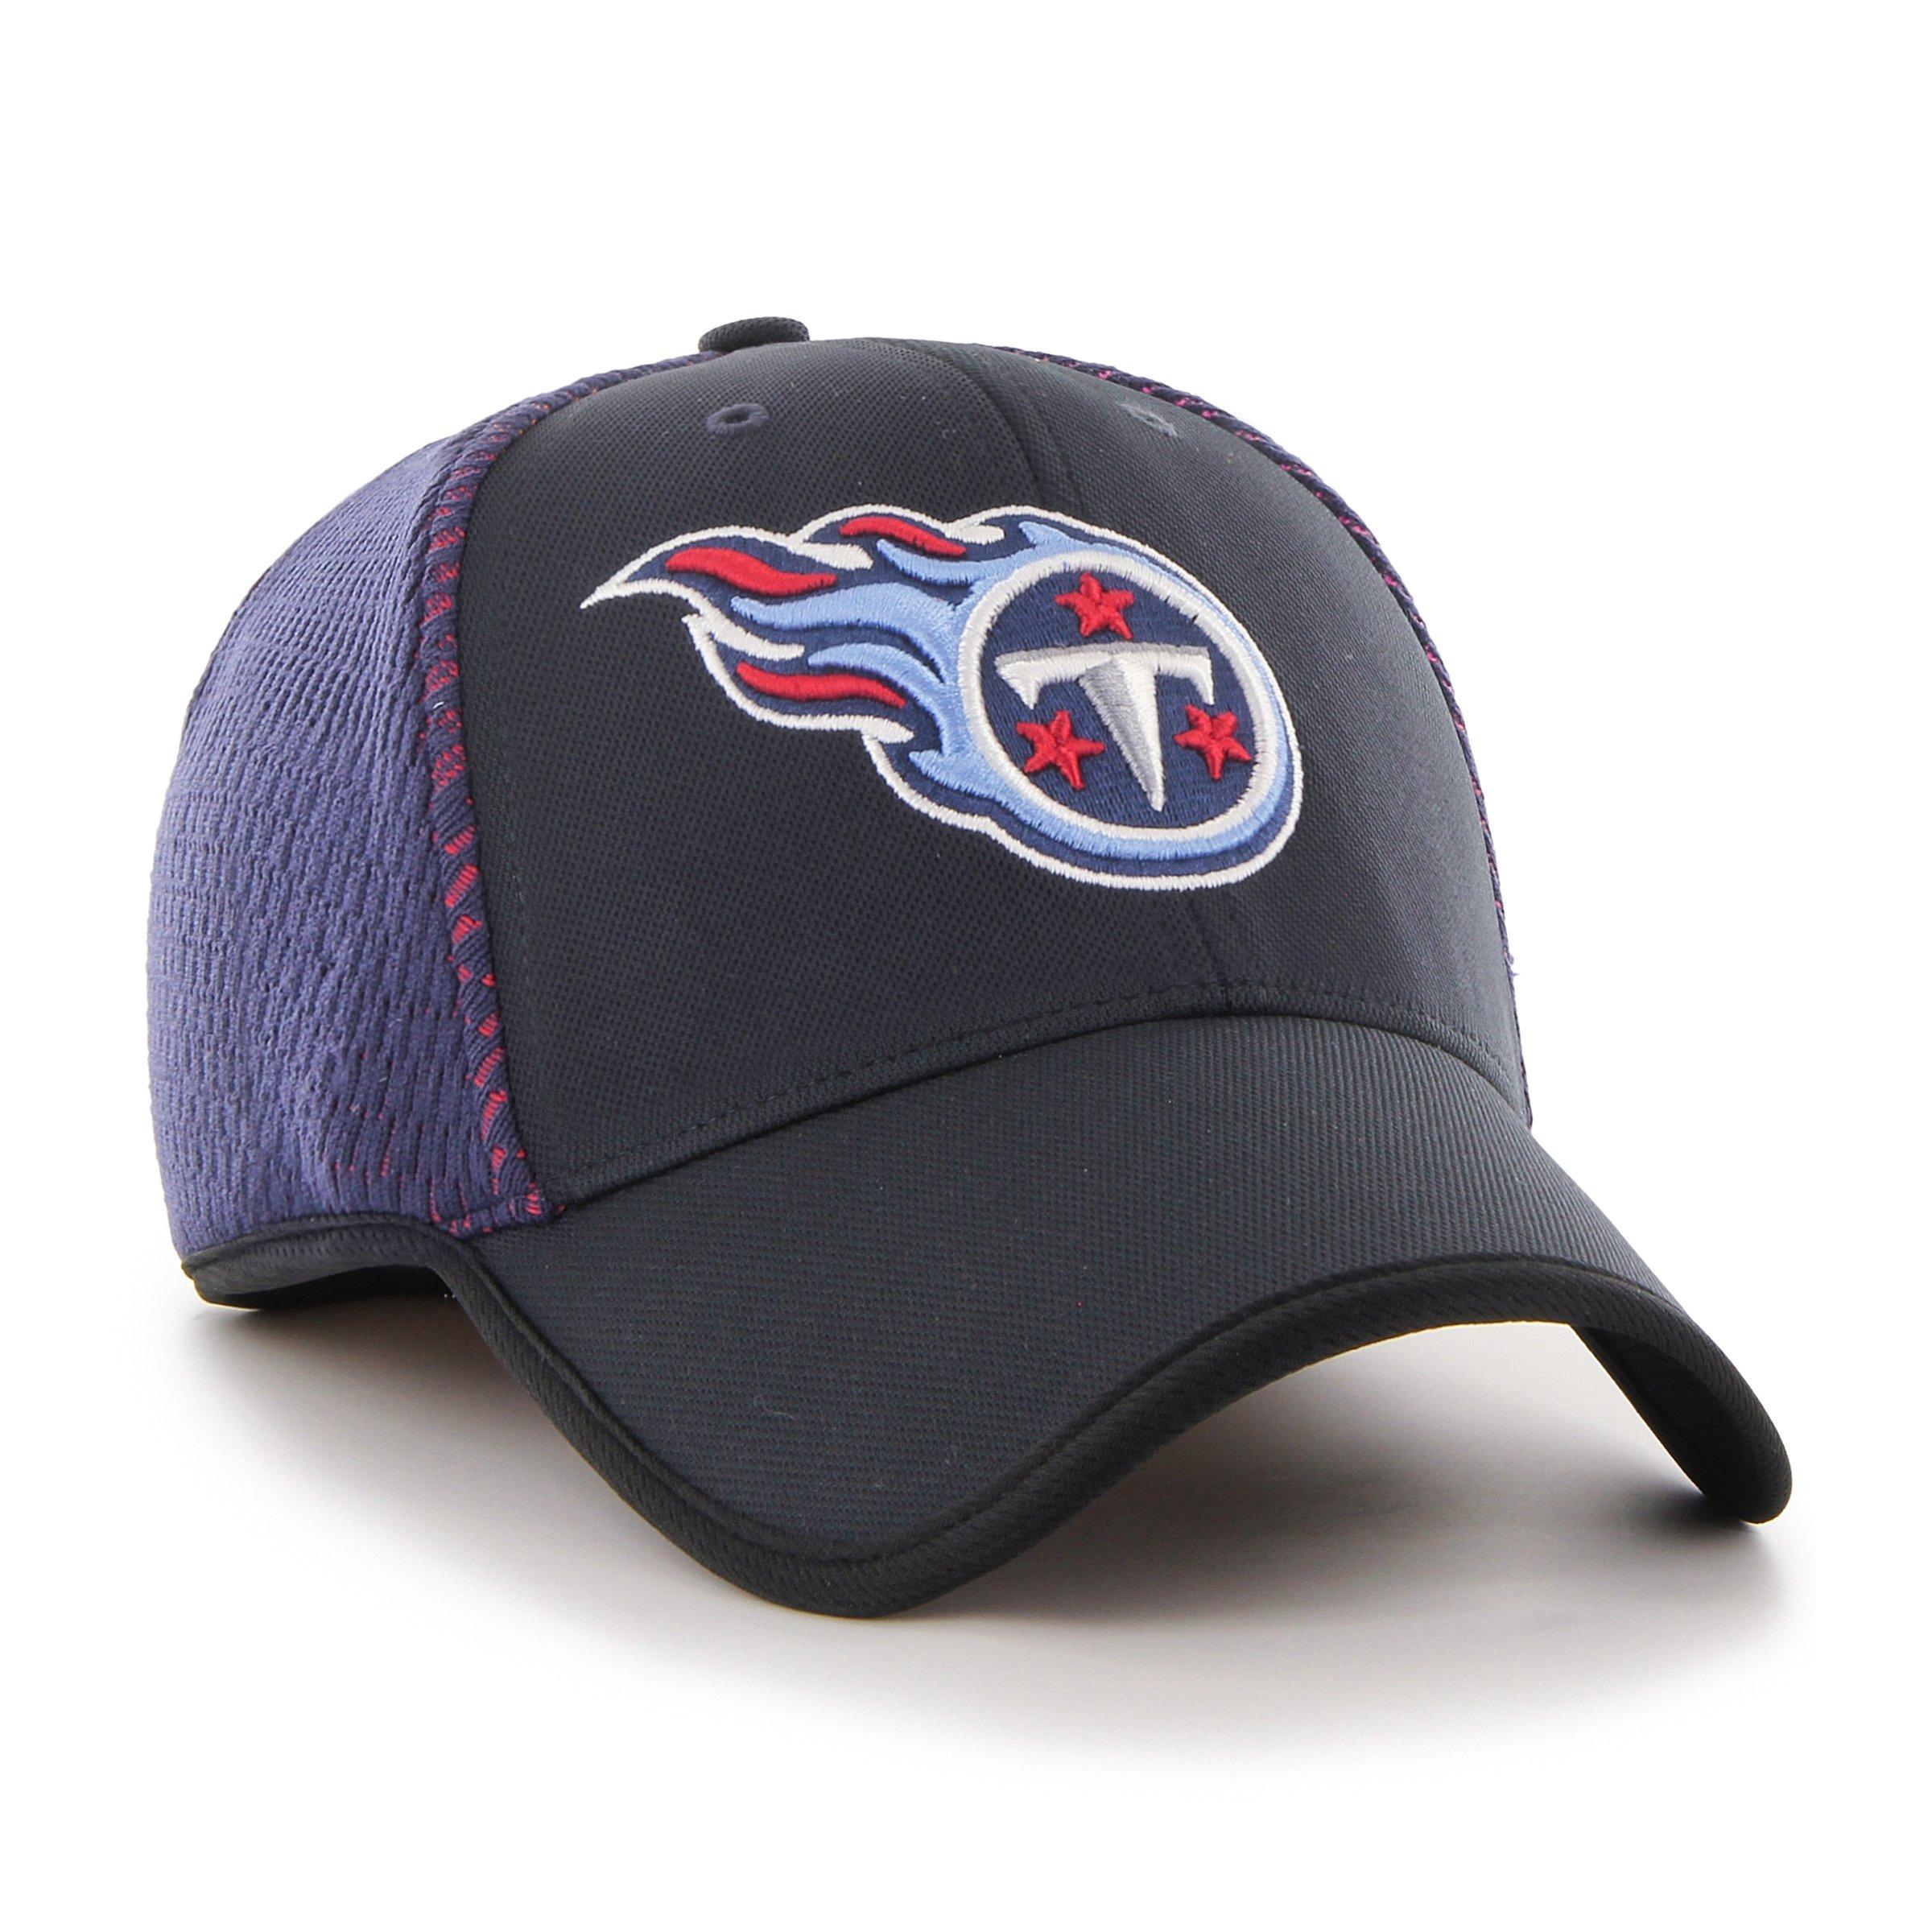 tennessee titans nike hat